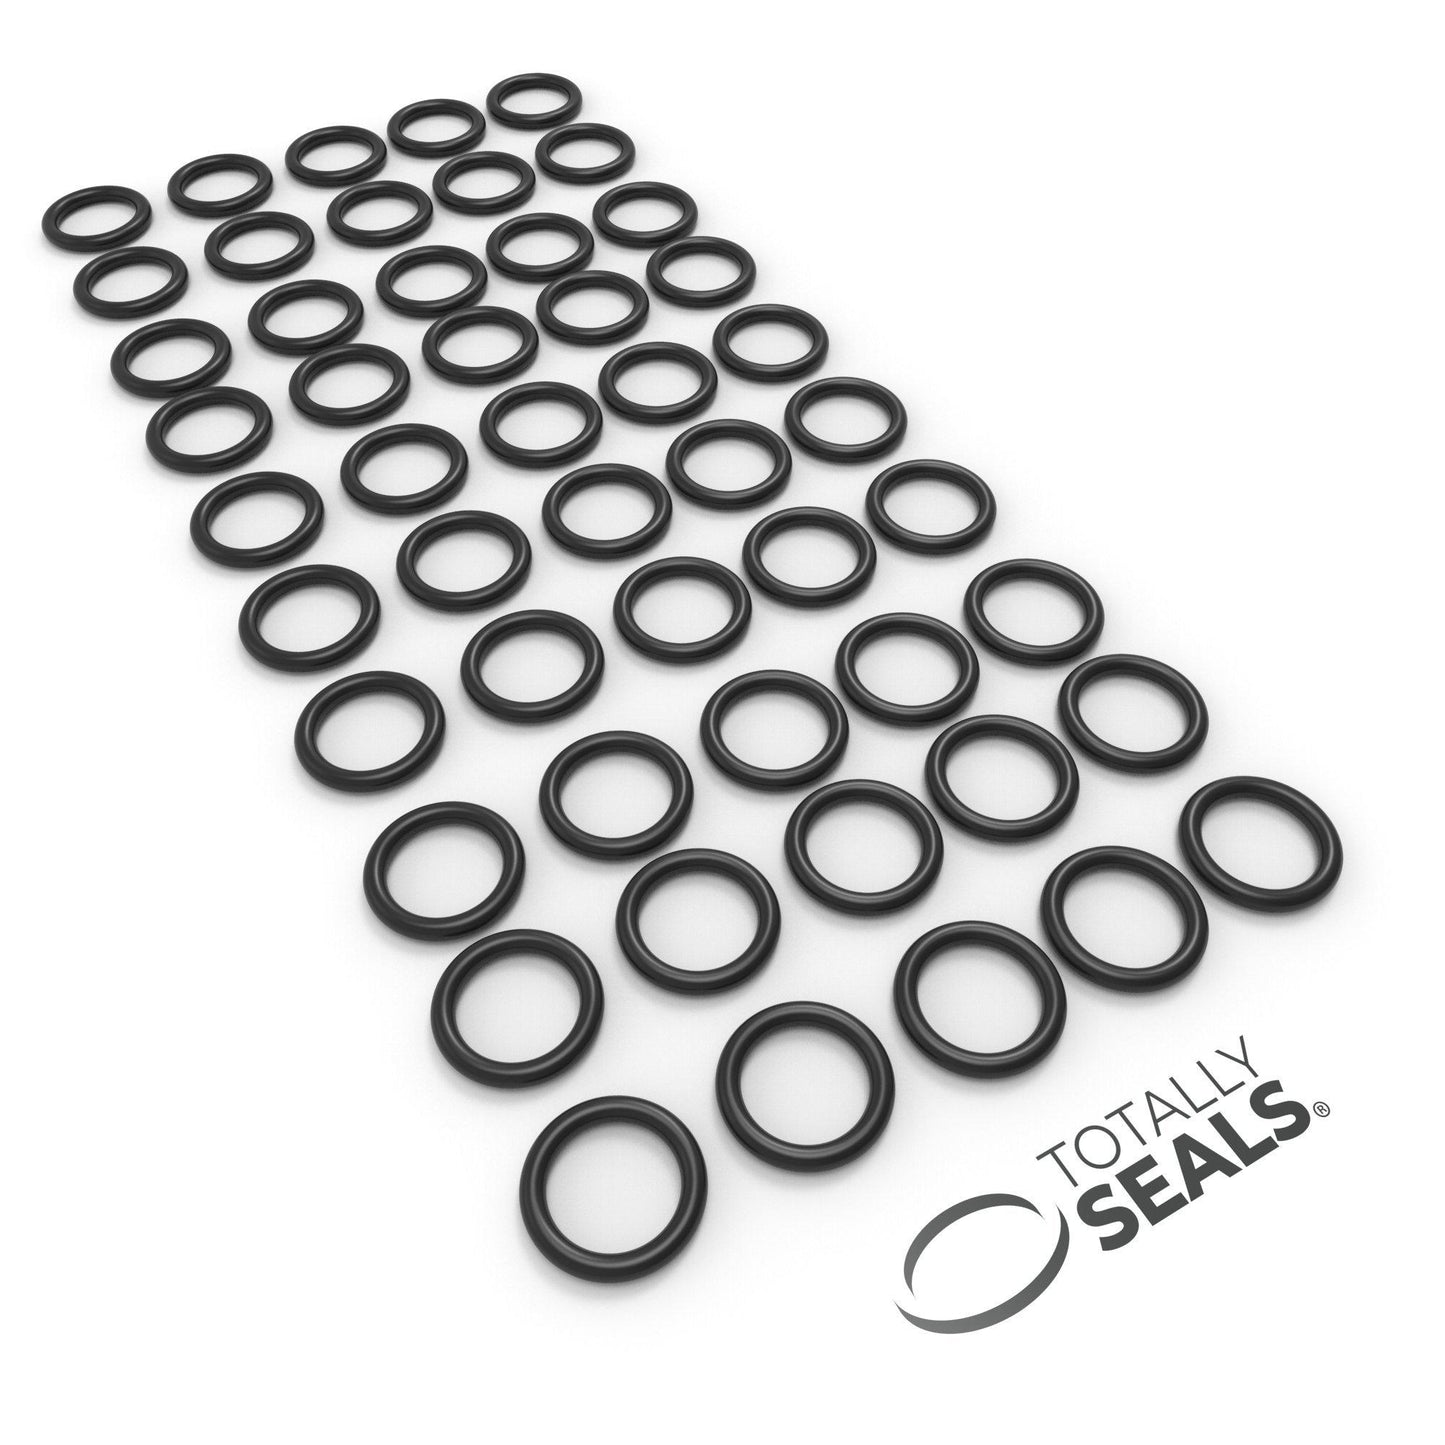 19mm x 1.5mm (22mm OD) Nitrile O-Rings - Totally Seals®